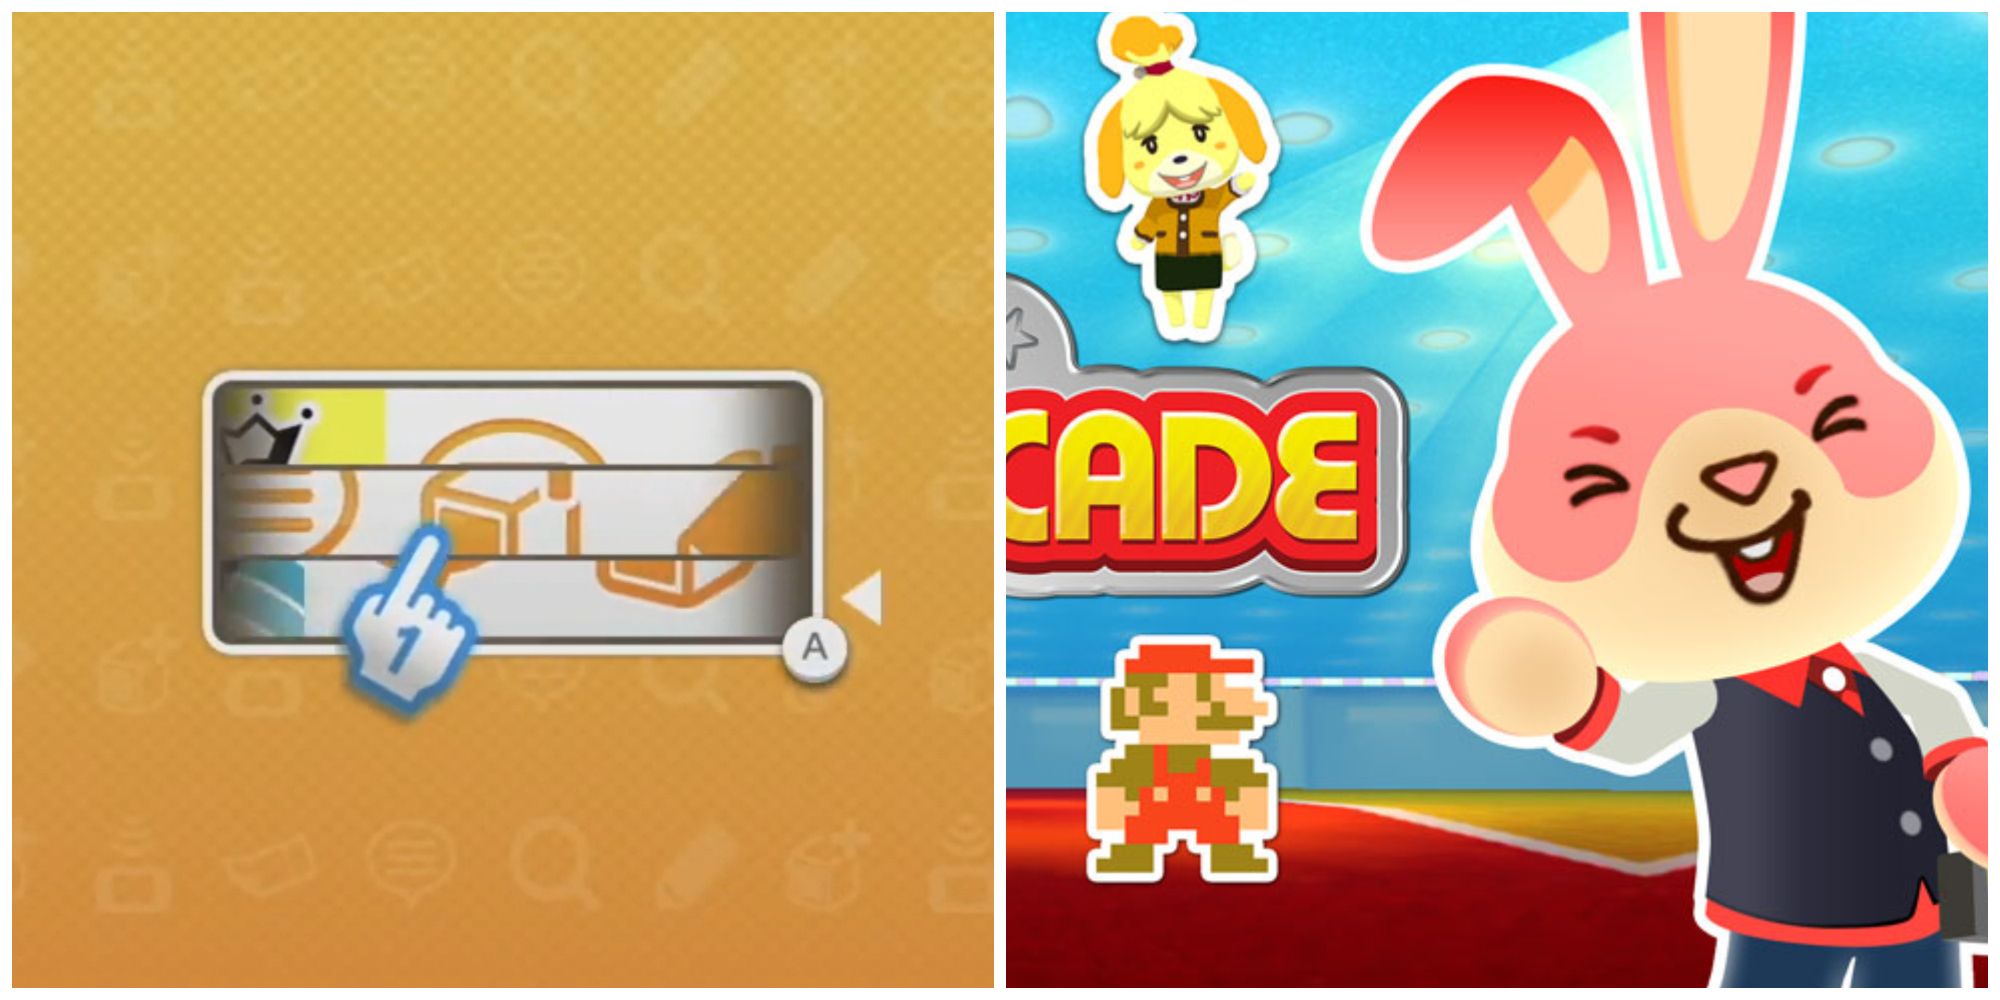 Left: Wii U eShop minigame. Right: The pink rabbit from Nintendo Badge Arcade. Image source: Jacob R on YouTube